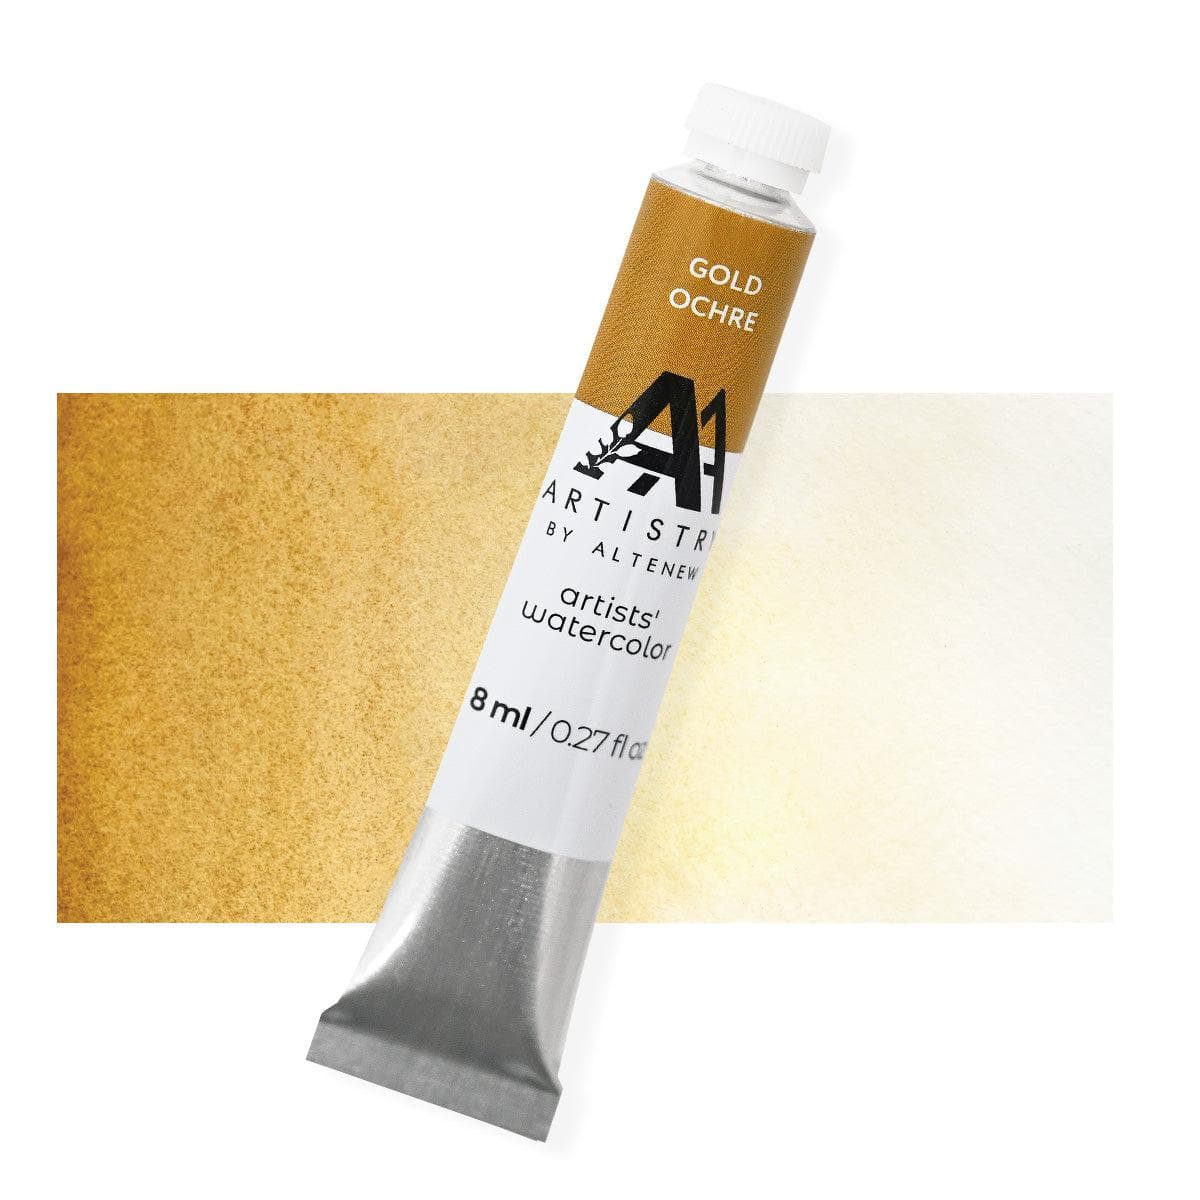 Watercolor Artists' Watercolor Tube - Gold Ochre